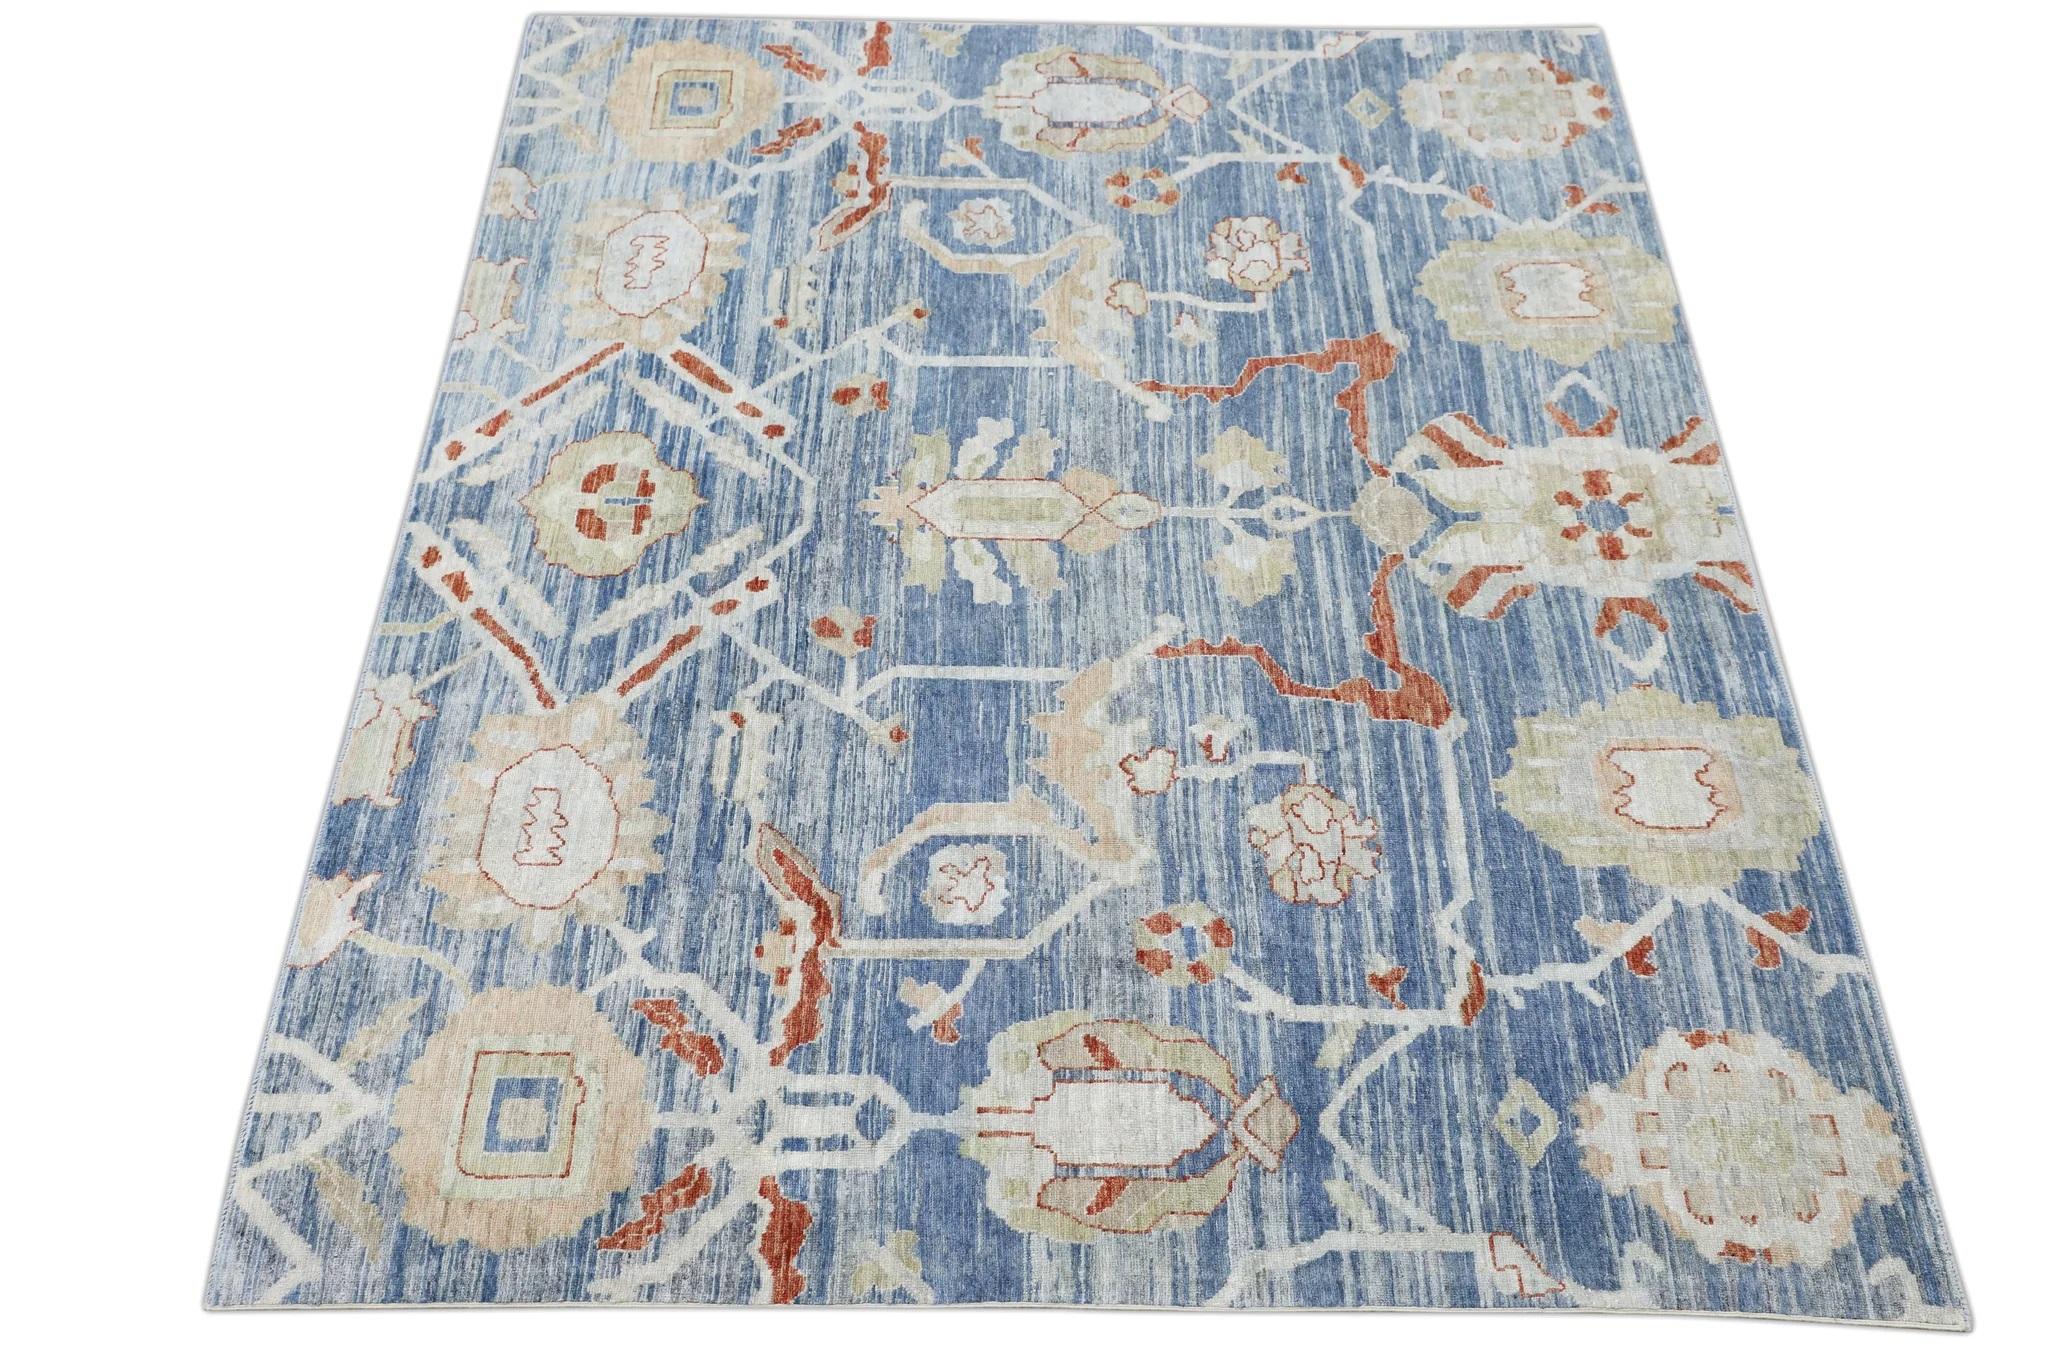 Blue Handwoven Wool Turkish Oushak Rug with Red Floral Design 8' x 6'7